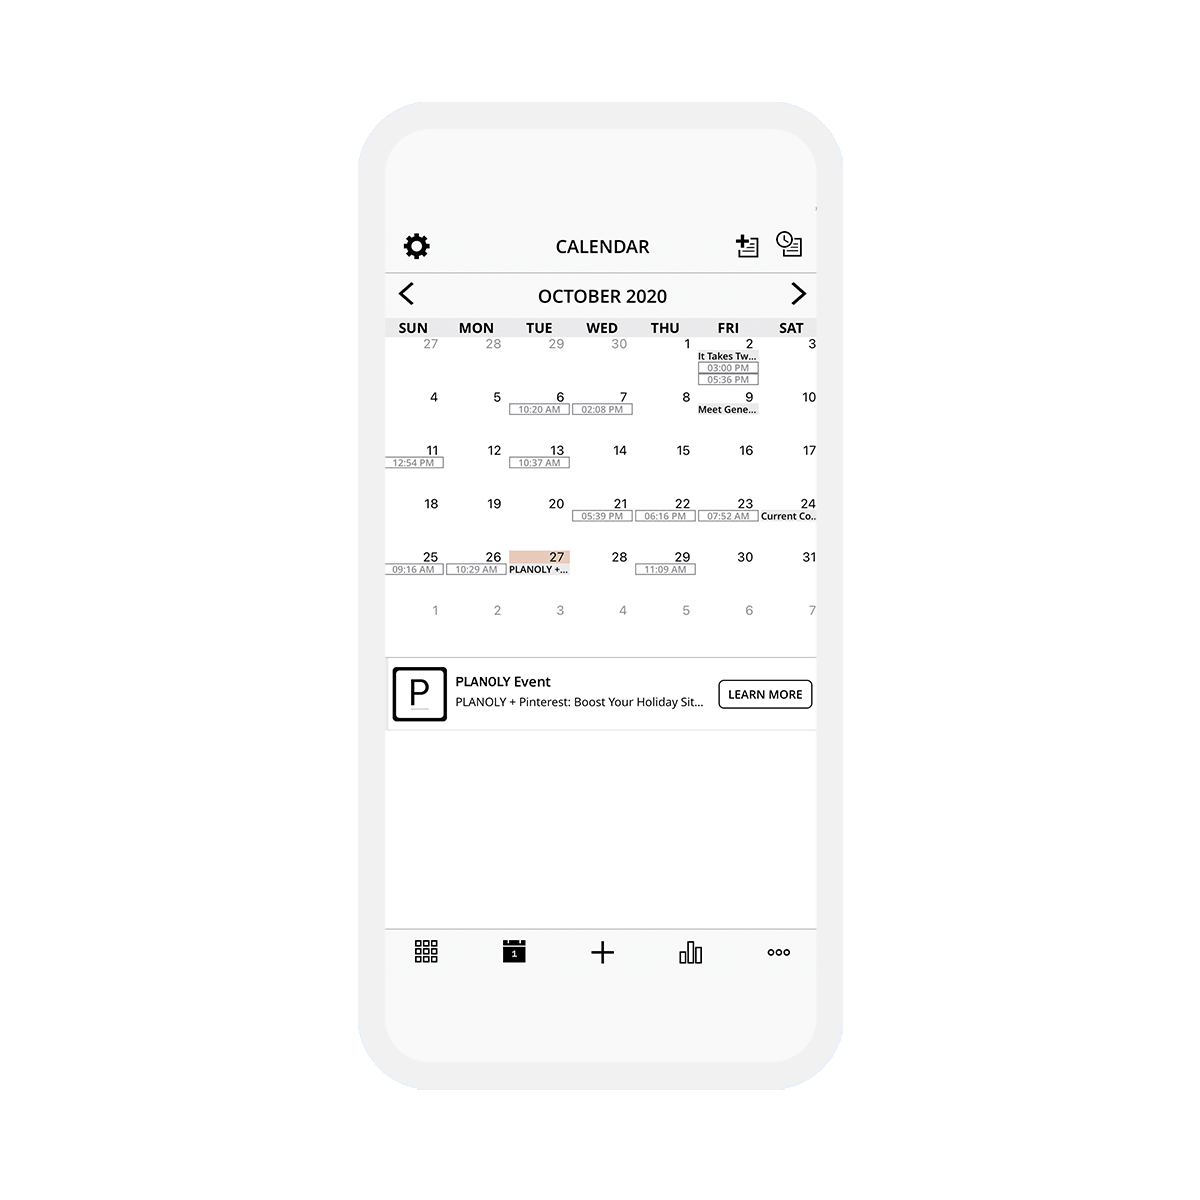 Calendar notes are now repeatable